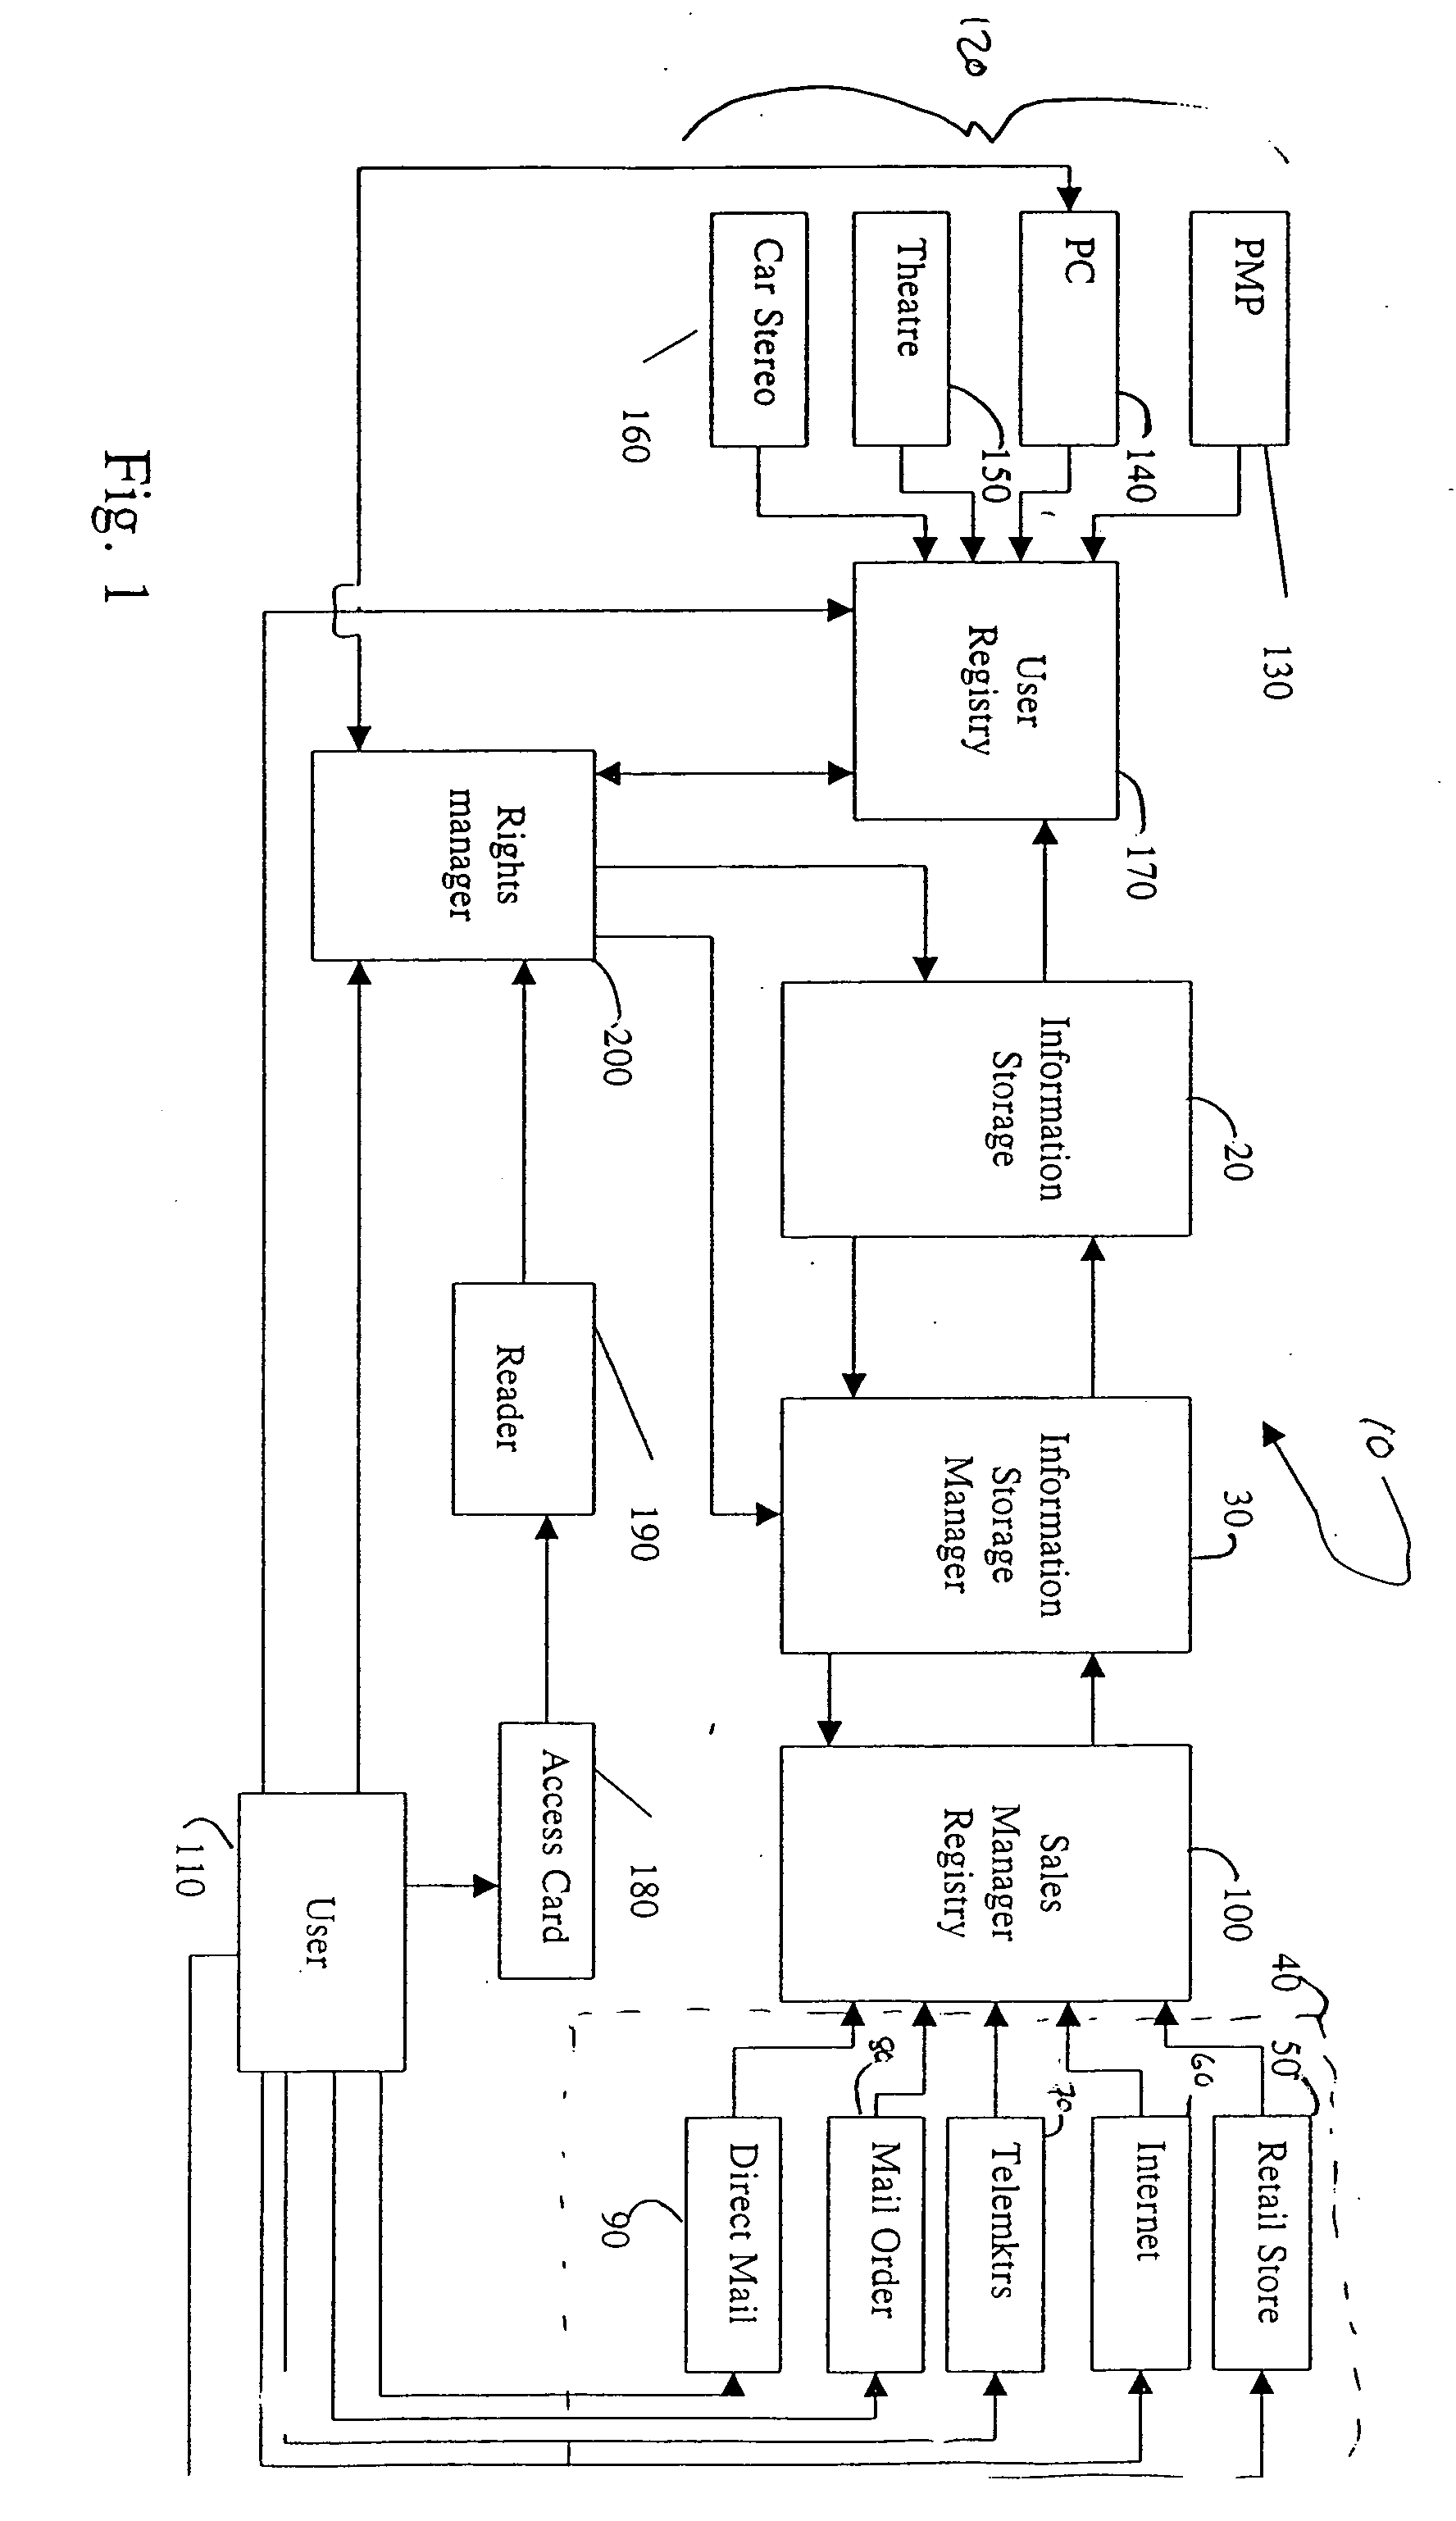 Method and system for managing rights in digital information over a network